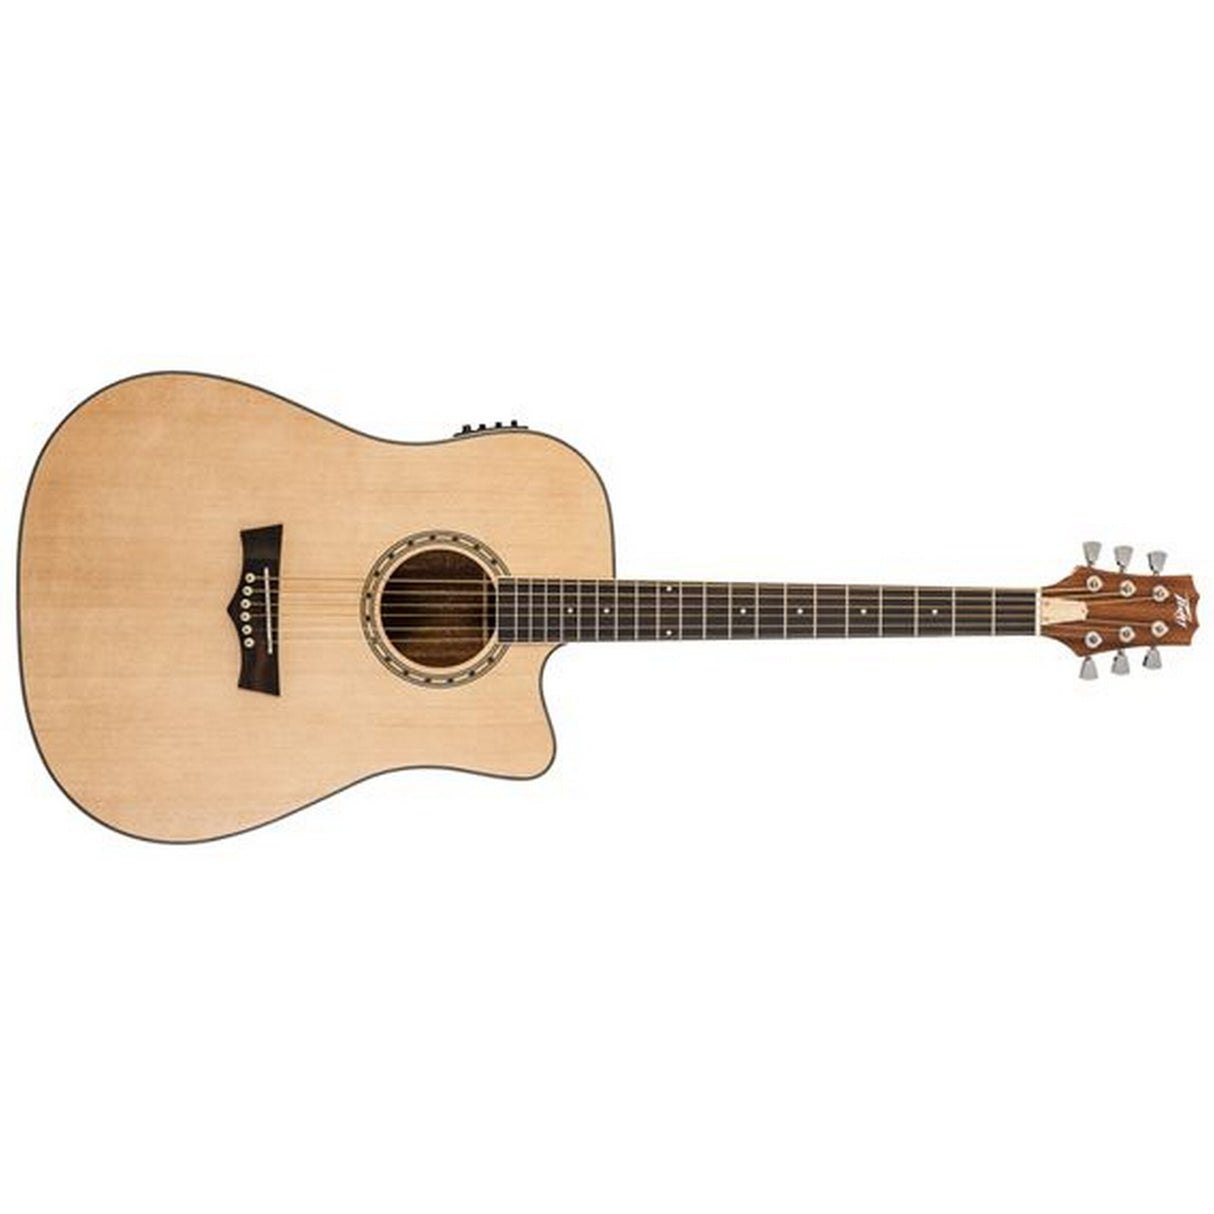 Peavey Delta Woods DW-2 CE Solid Top Cutaway Acoustic-Electric Guitar with Electronics